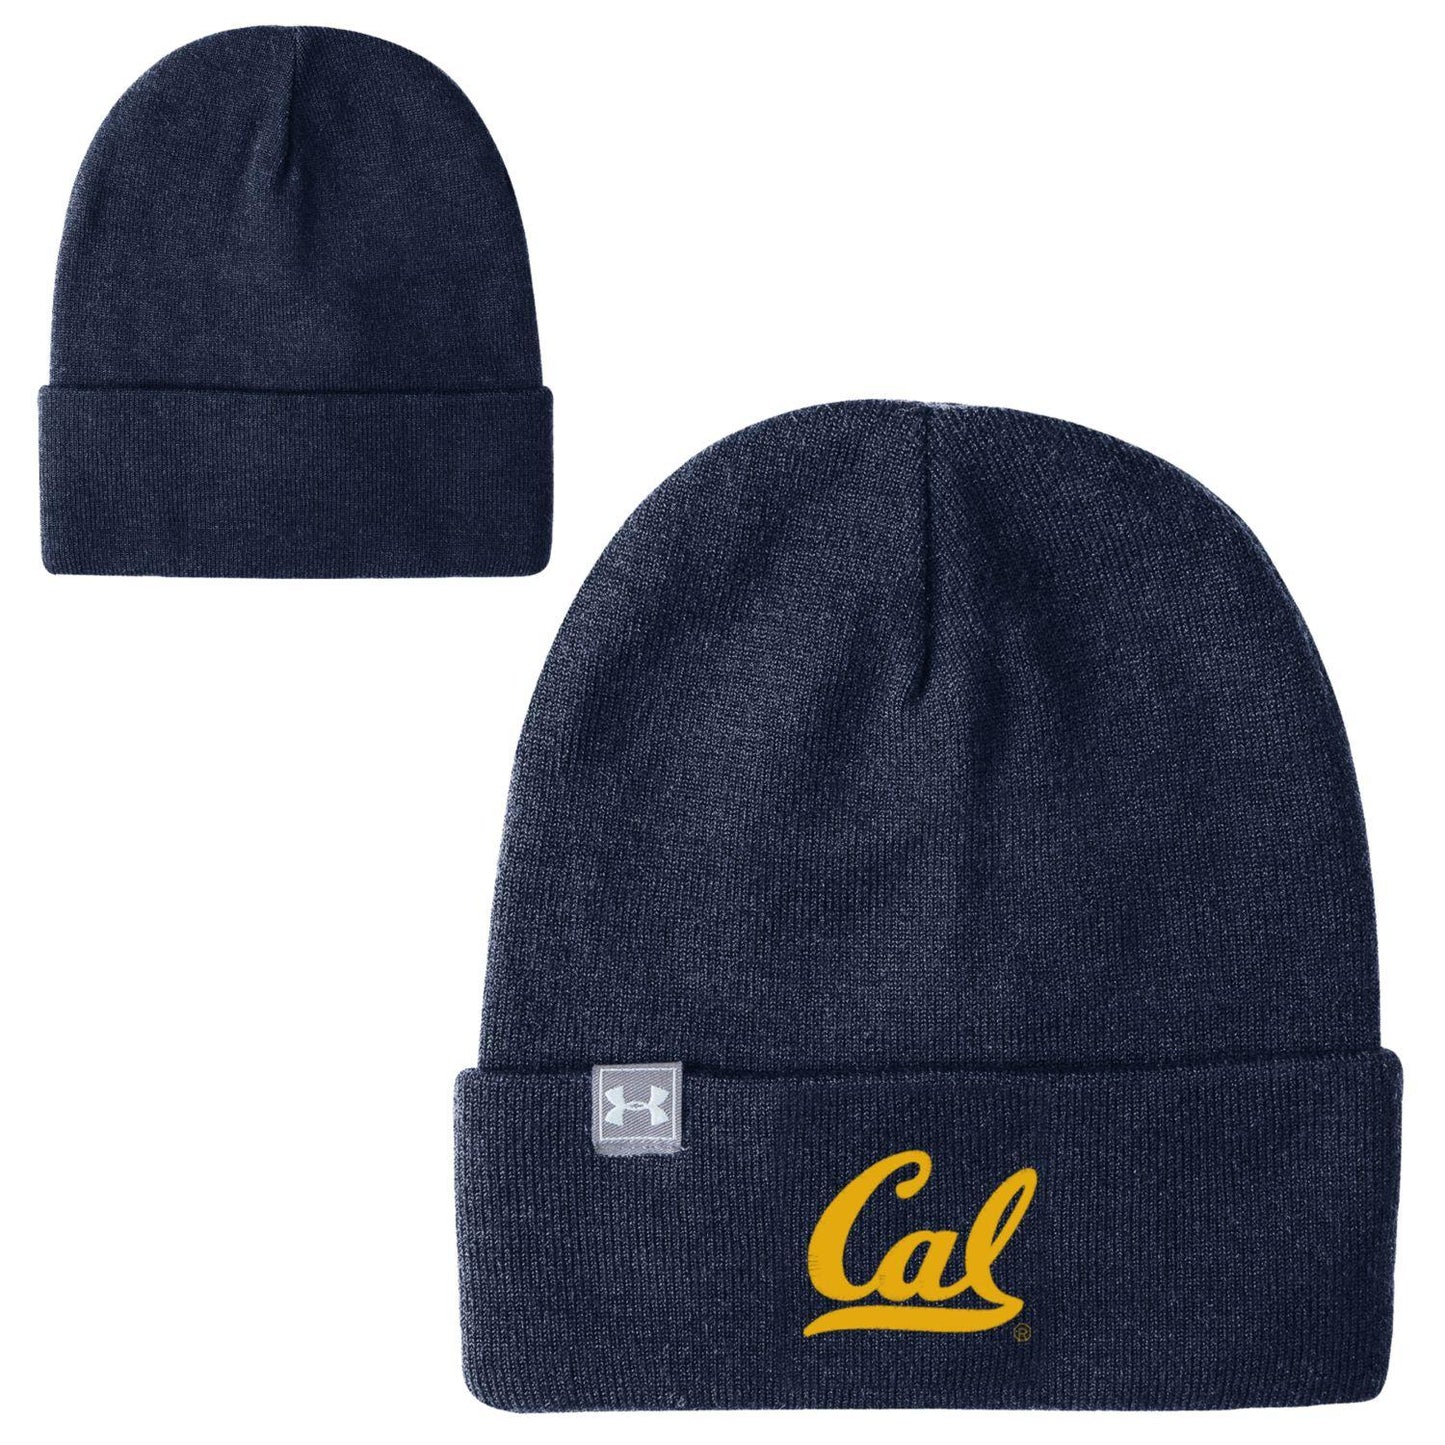 Under Armour Cal embroidered cuffed beanie-Navy-Shop College Wear